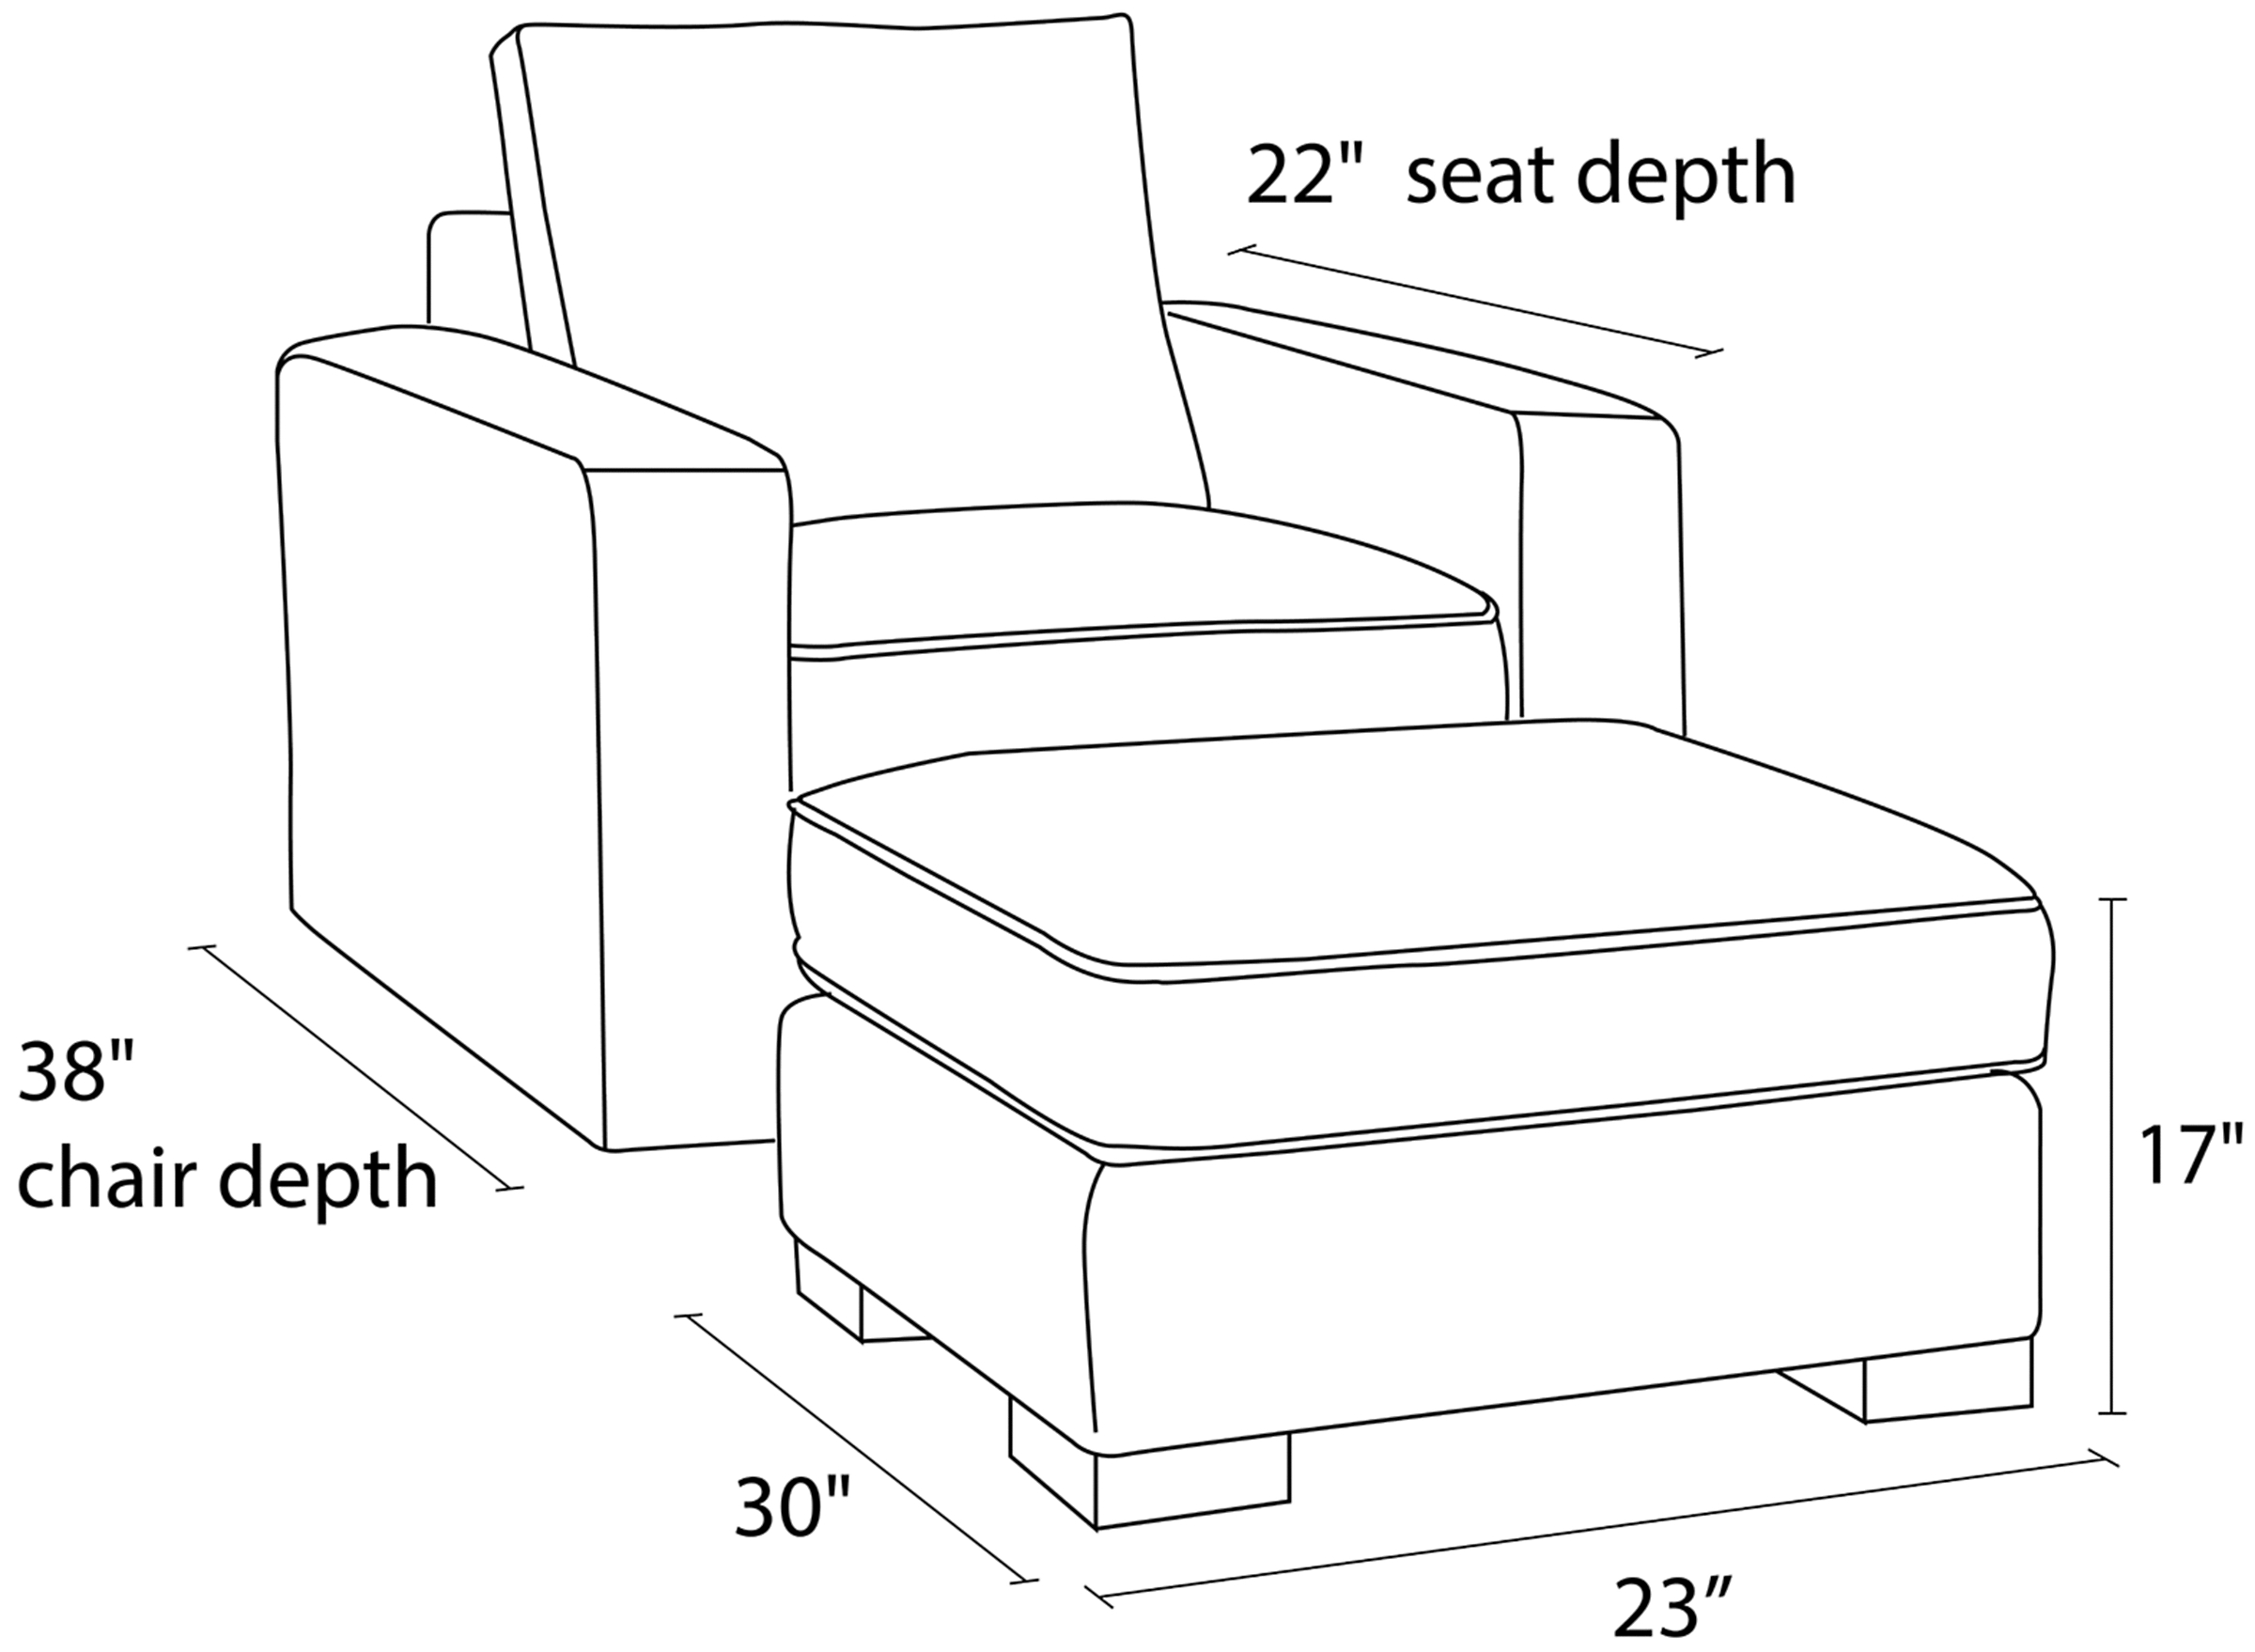 Side view dimension illustration of Metro chair and ottoman.